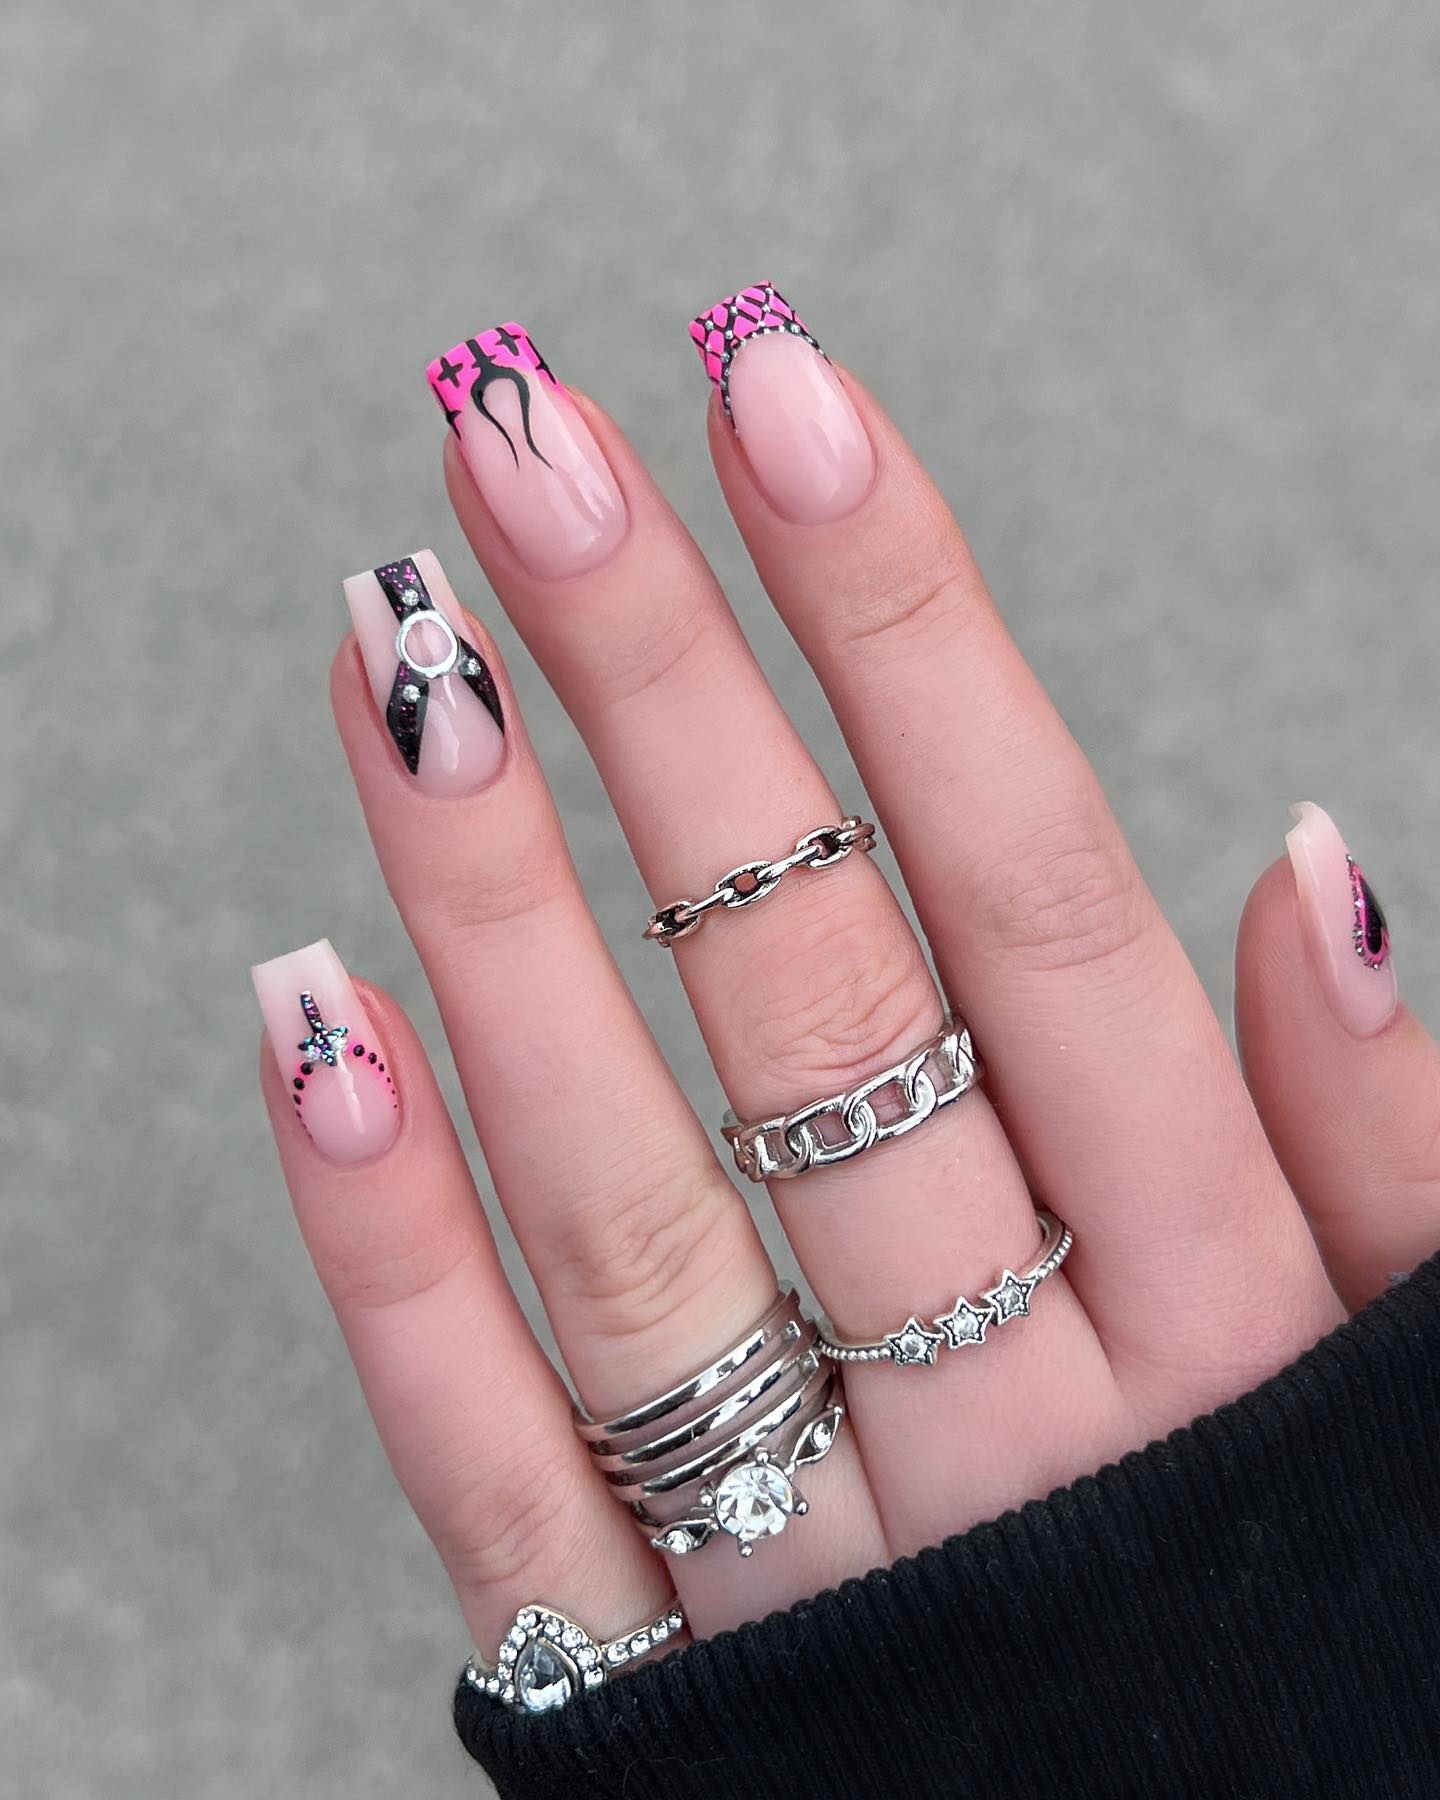 100+ Short Nail Designs You’ll Want To Try This Year images 51